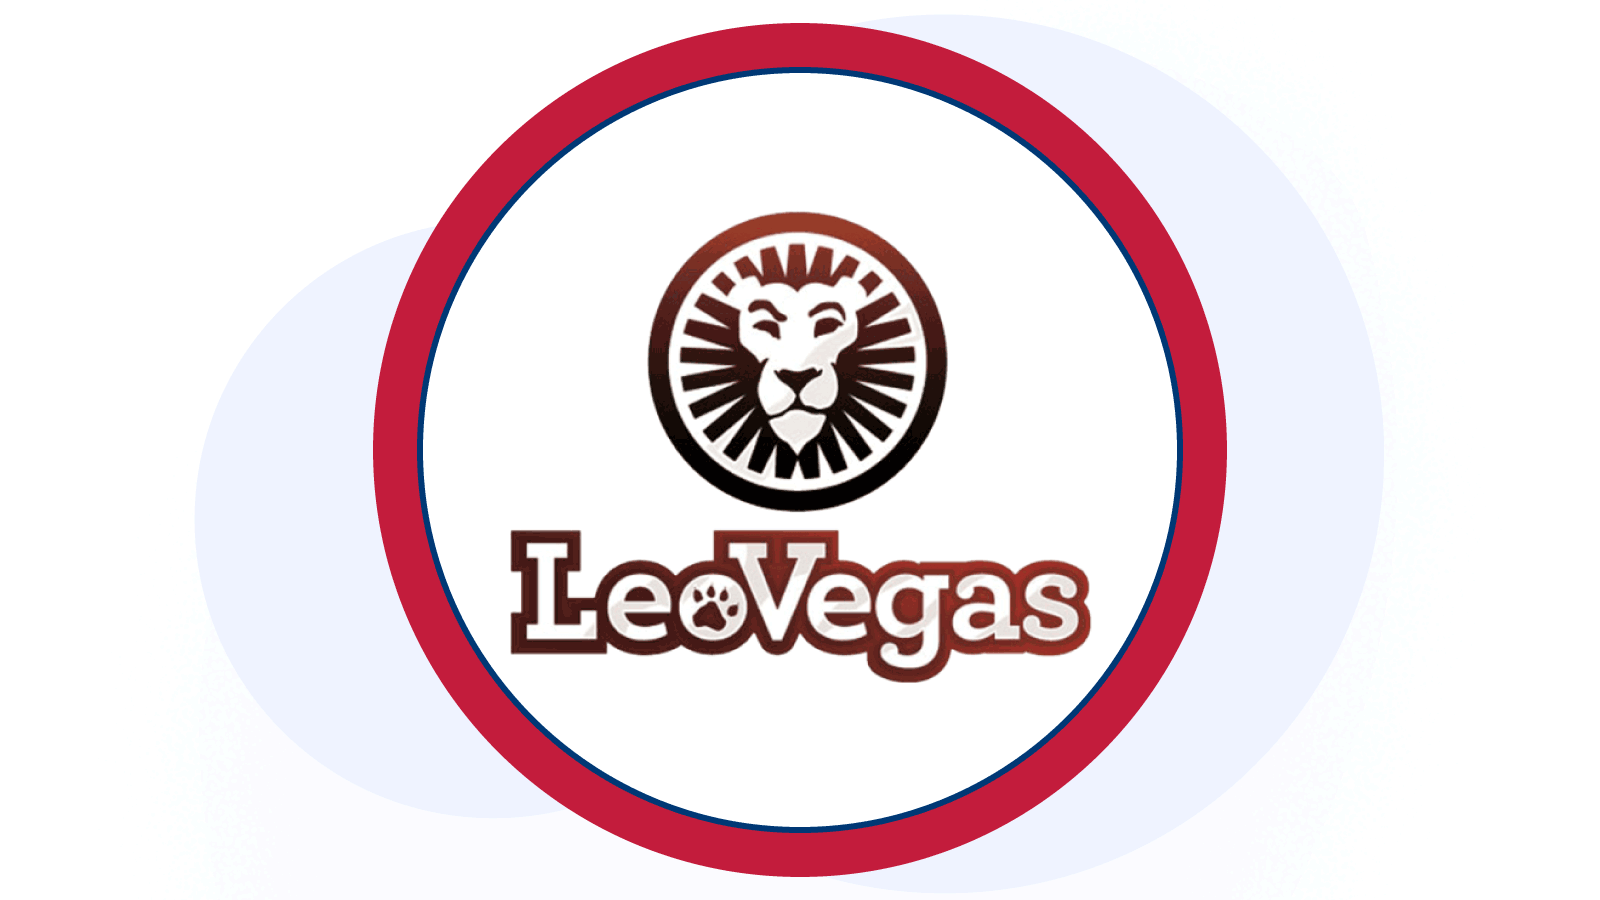 What makes LeoVegas so popular amongst Canadians